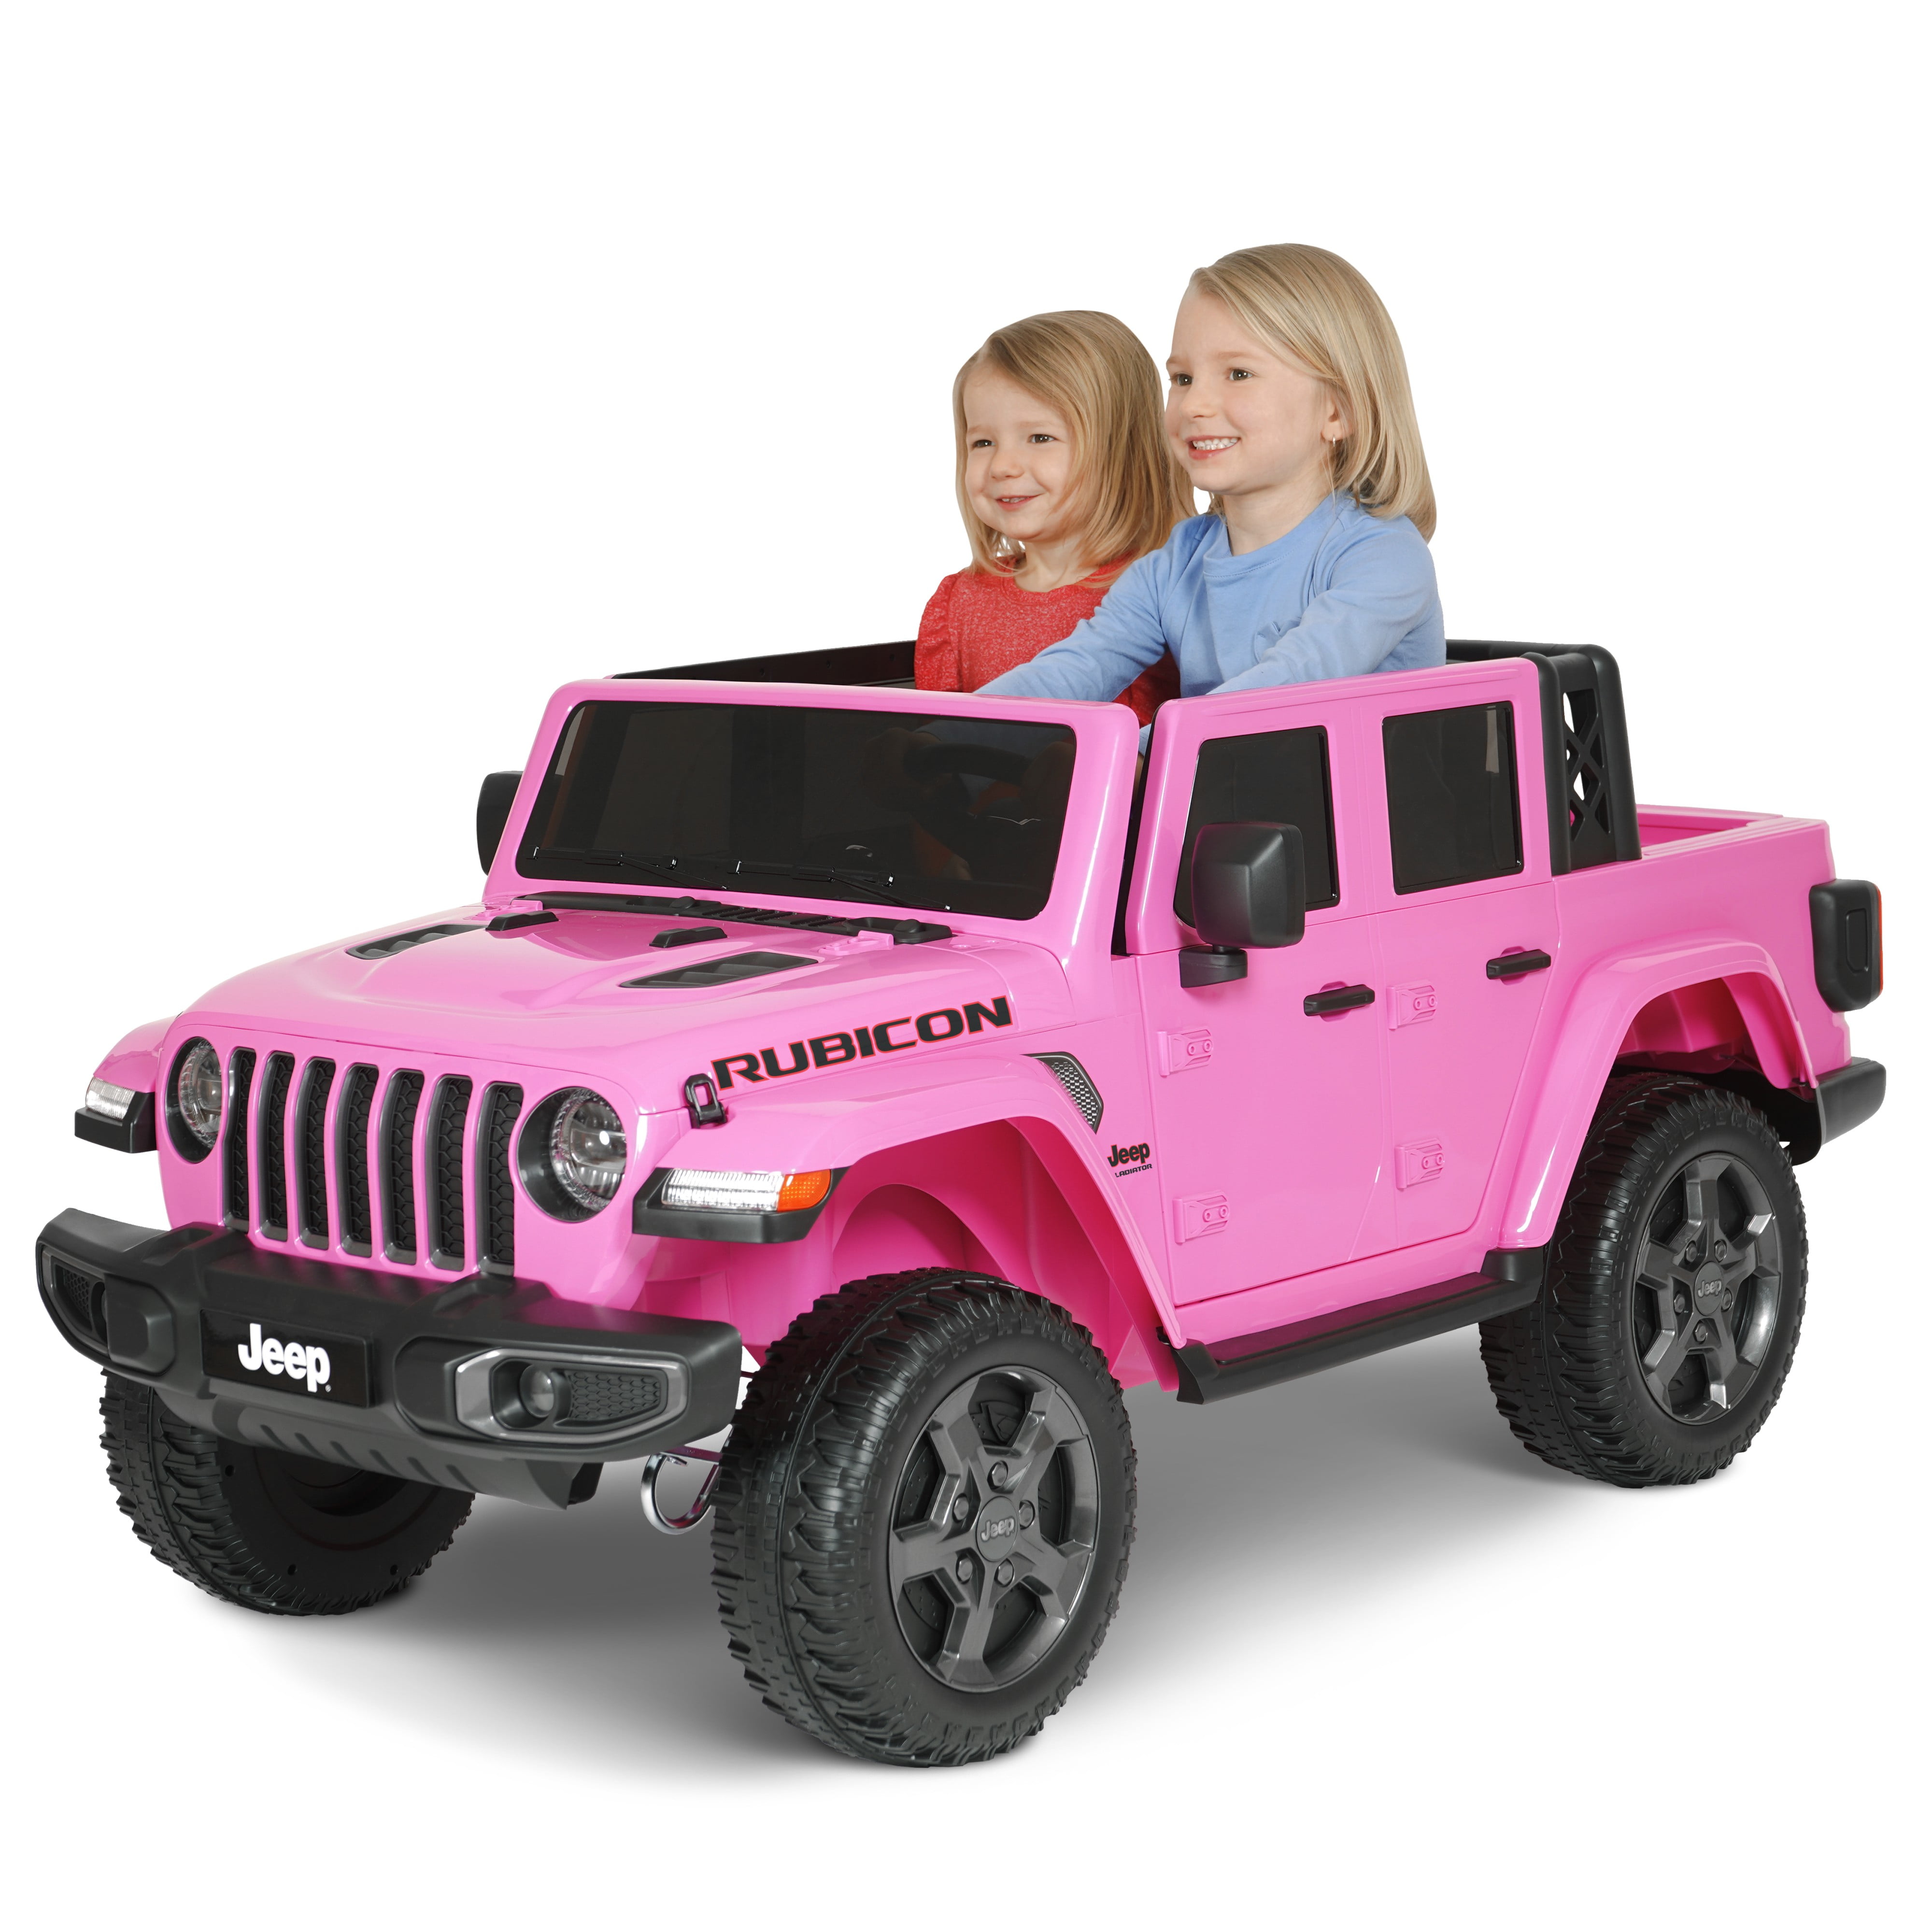 Childrens ride on jeep